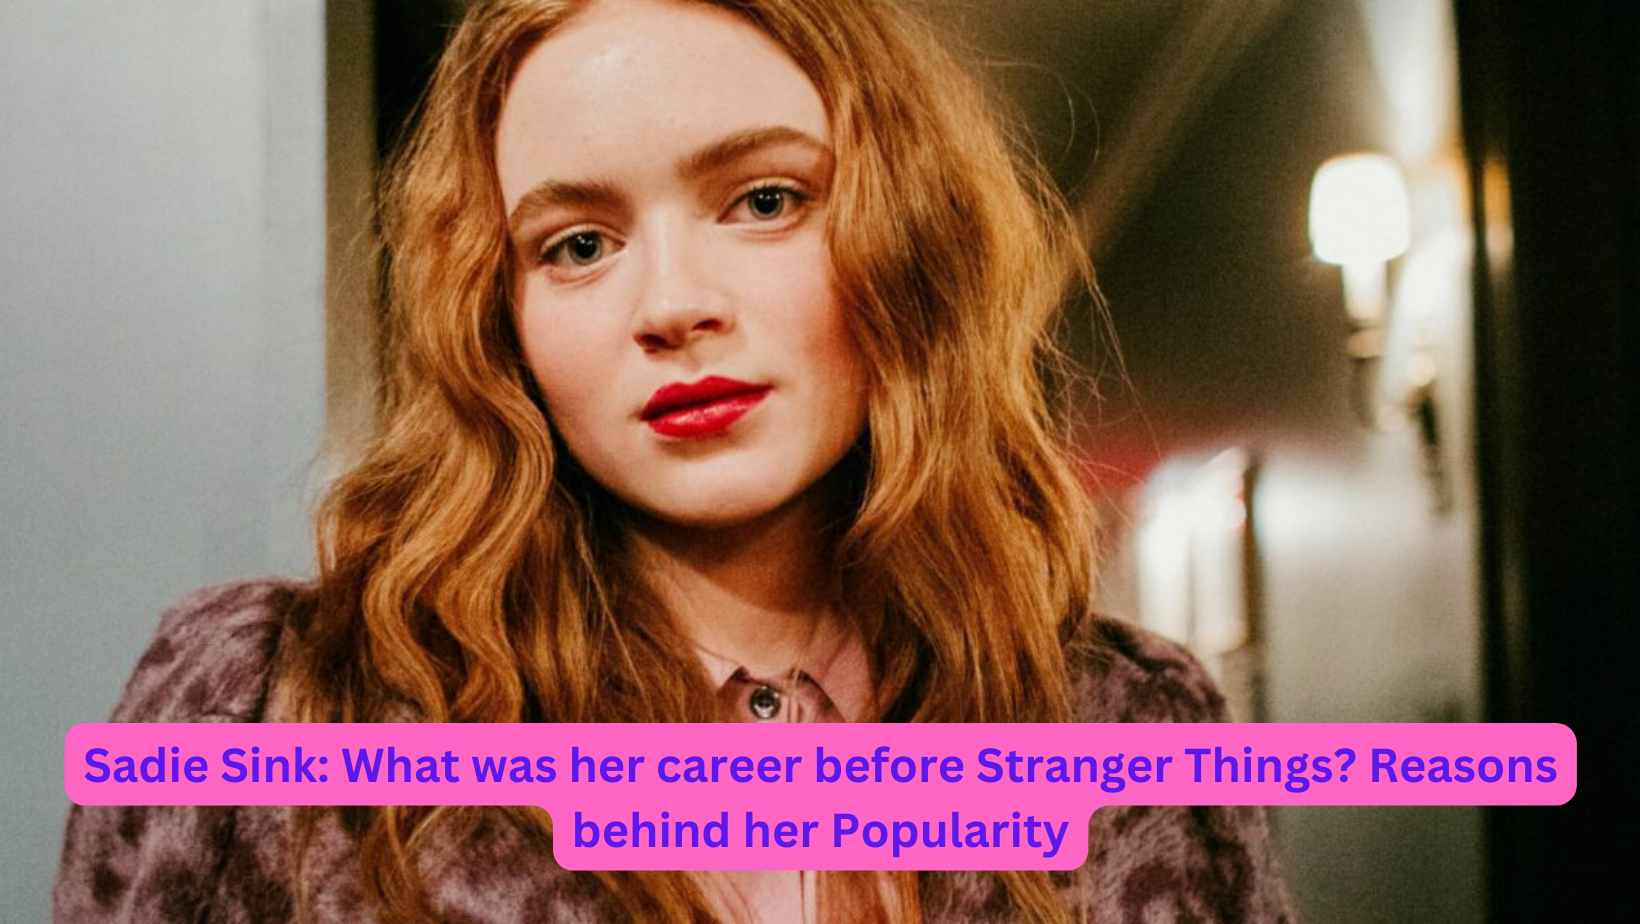 Sadie Sink and her Popularity